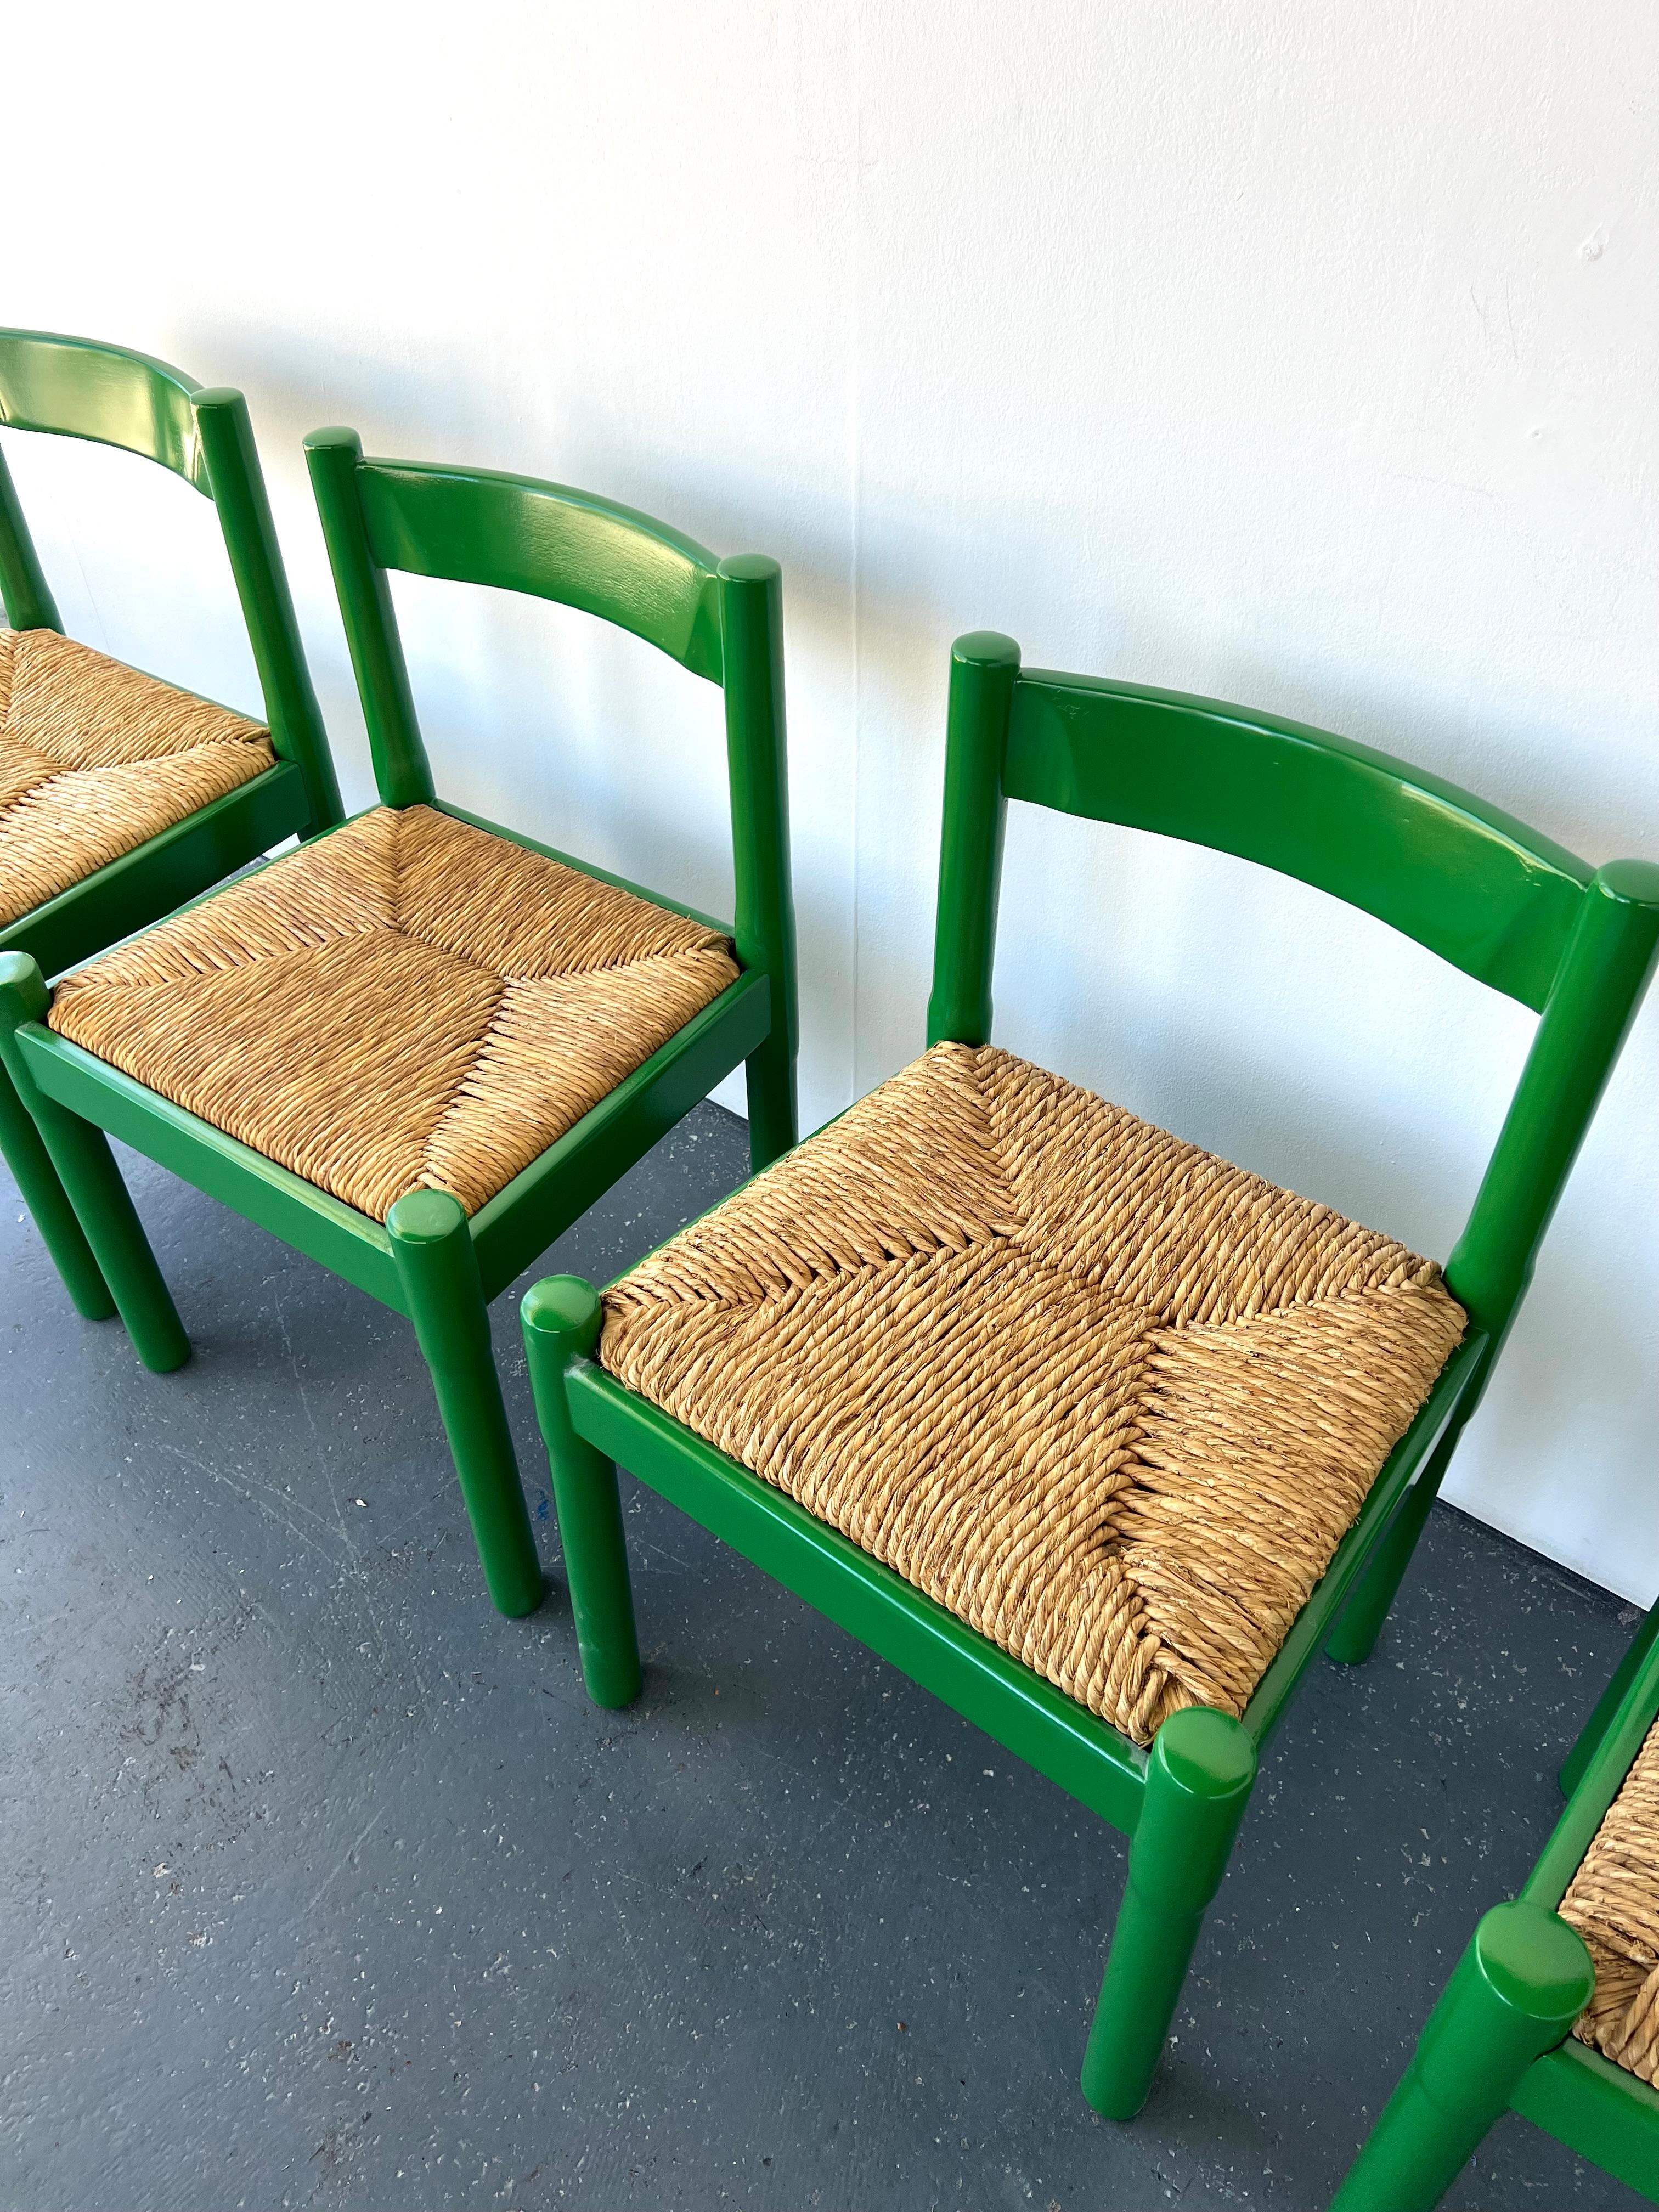 Set of x6 Glossy Green Carimate Carver Chairs by Vico Magistretti

The Carimate chair was born when Vico Magistretti (1920-2006) was conceiving designs for seating at the Carimate golf club in Italy in 1959. The design, which combines traditional